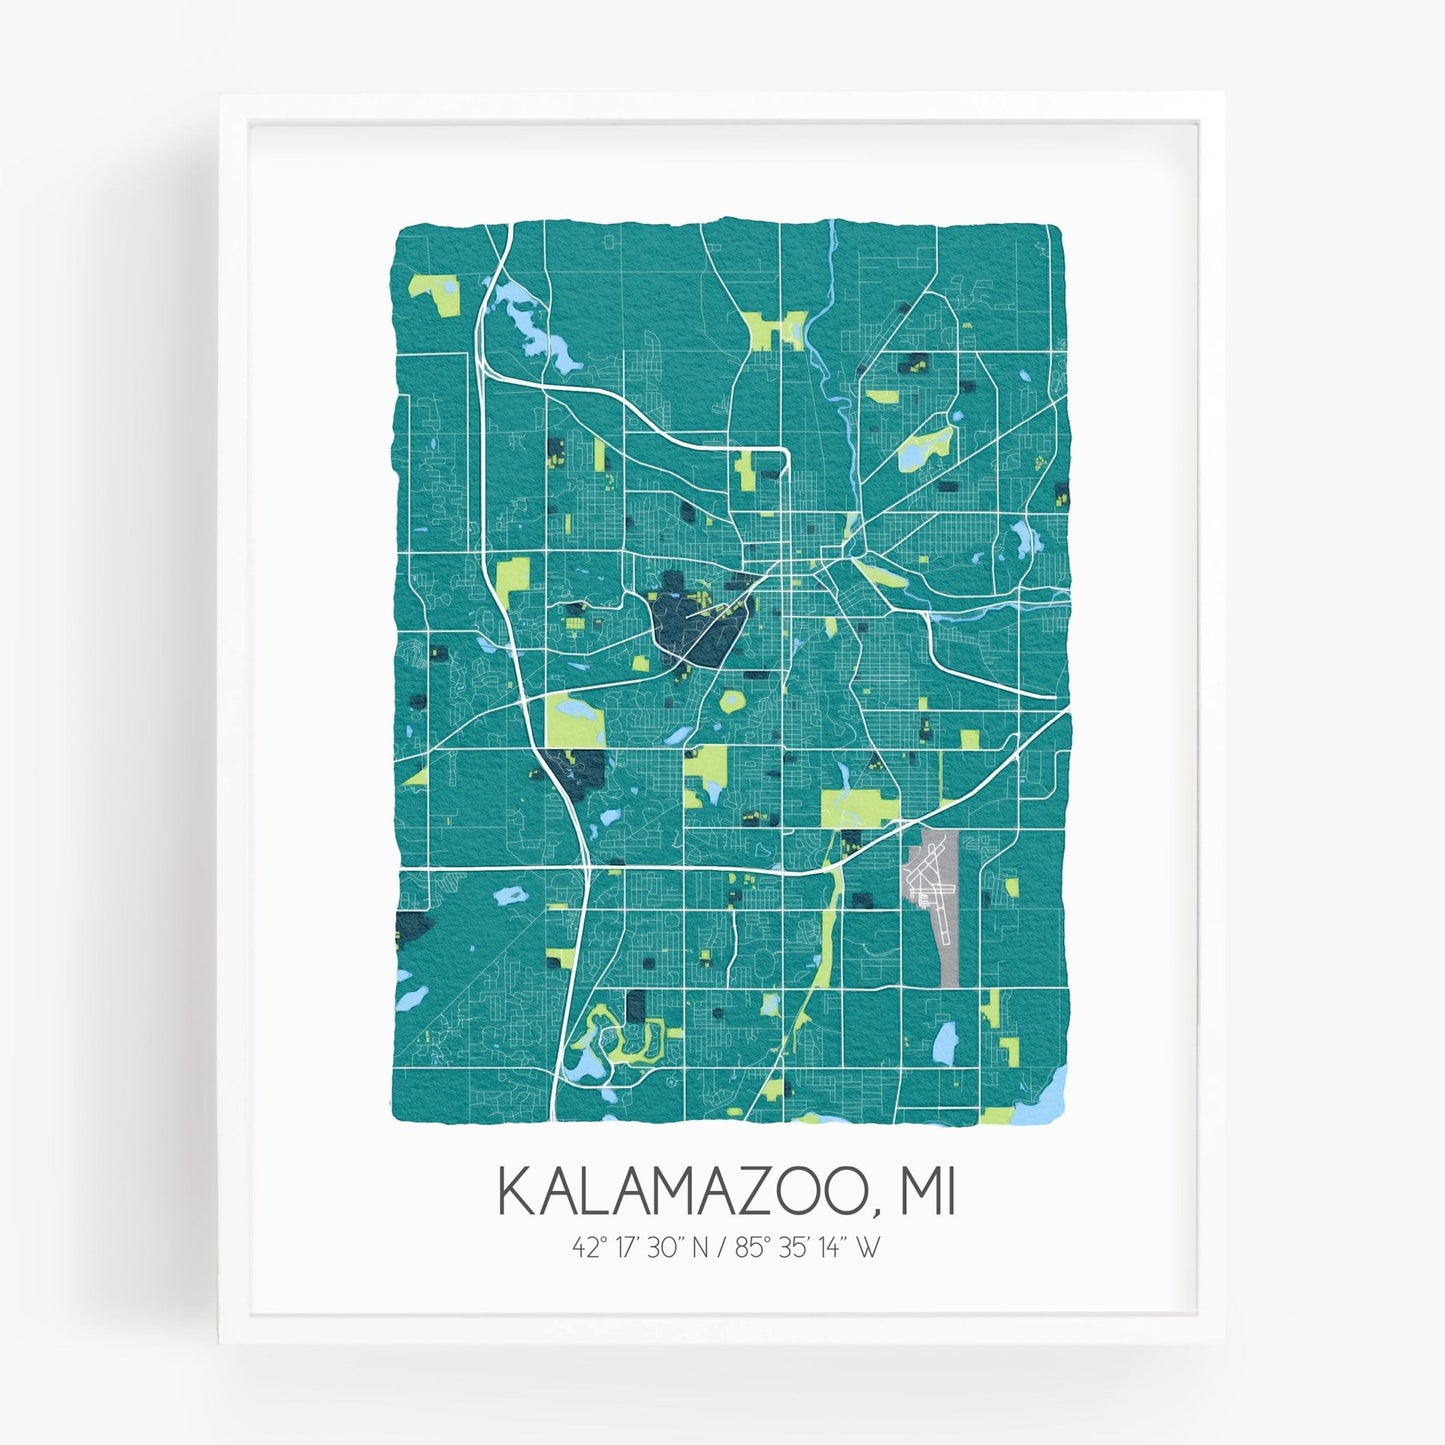 A city map print of Kalamazoo Michigan, in the color teal